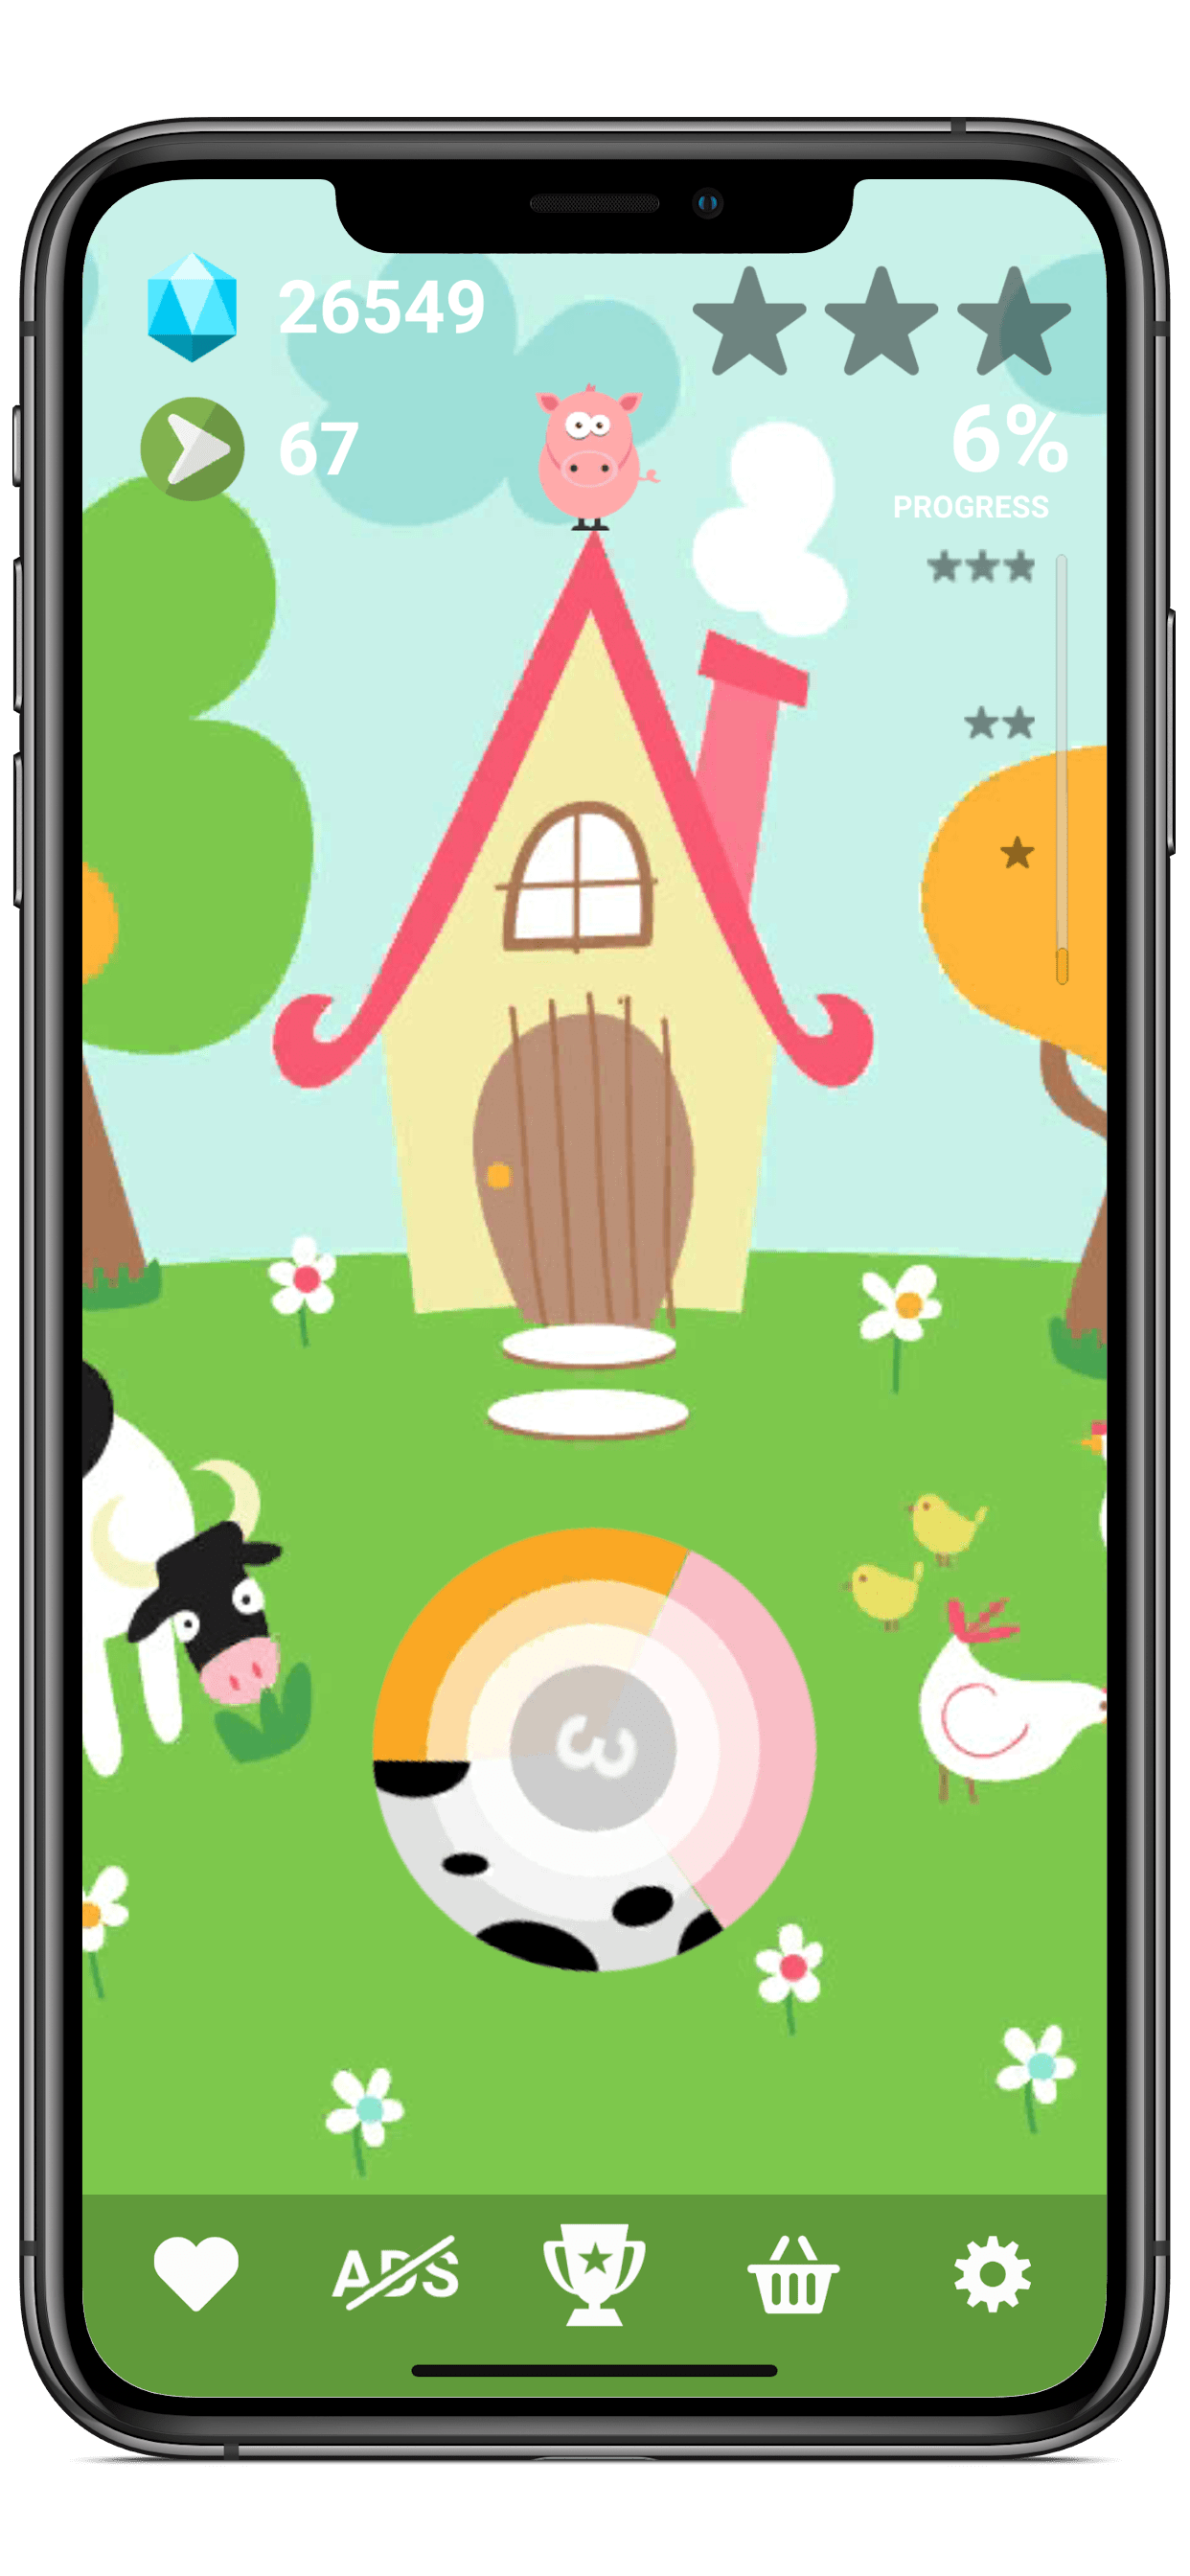 6 3 SWIRLY free game for Android, iOS, Windows - drop and match things, save farm animals, destroy planets, feel like on the beach